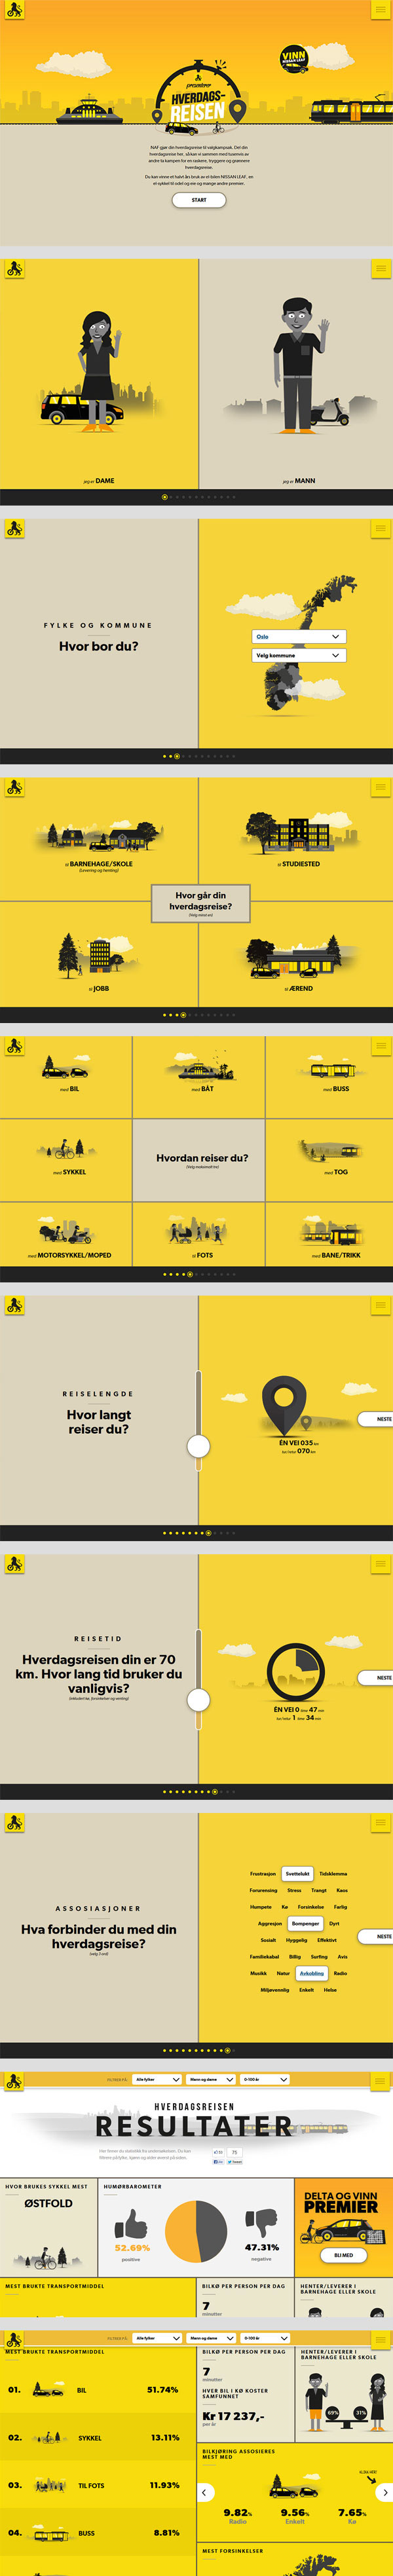 naf Reise campaign yellow Web mobile tablet Kiese